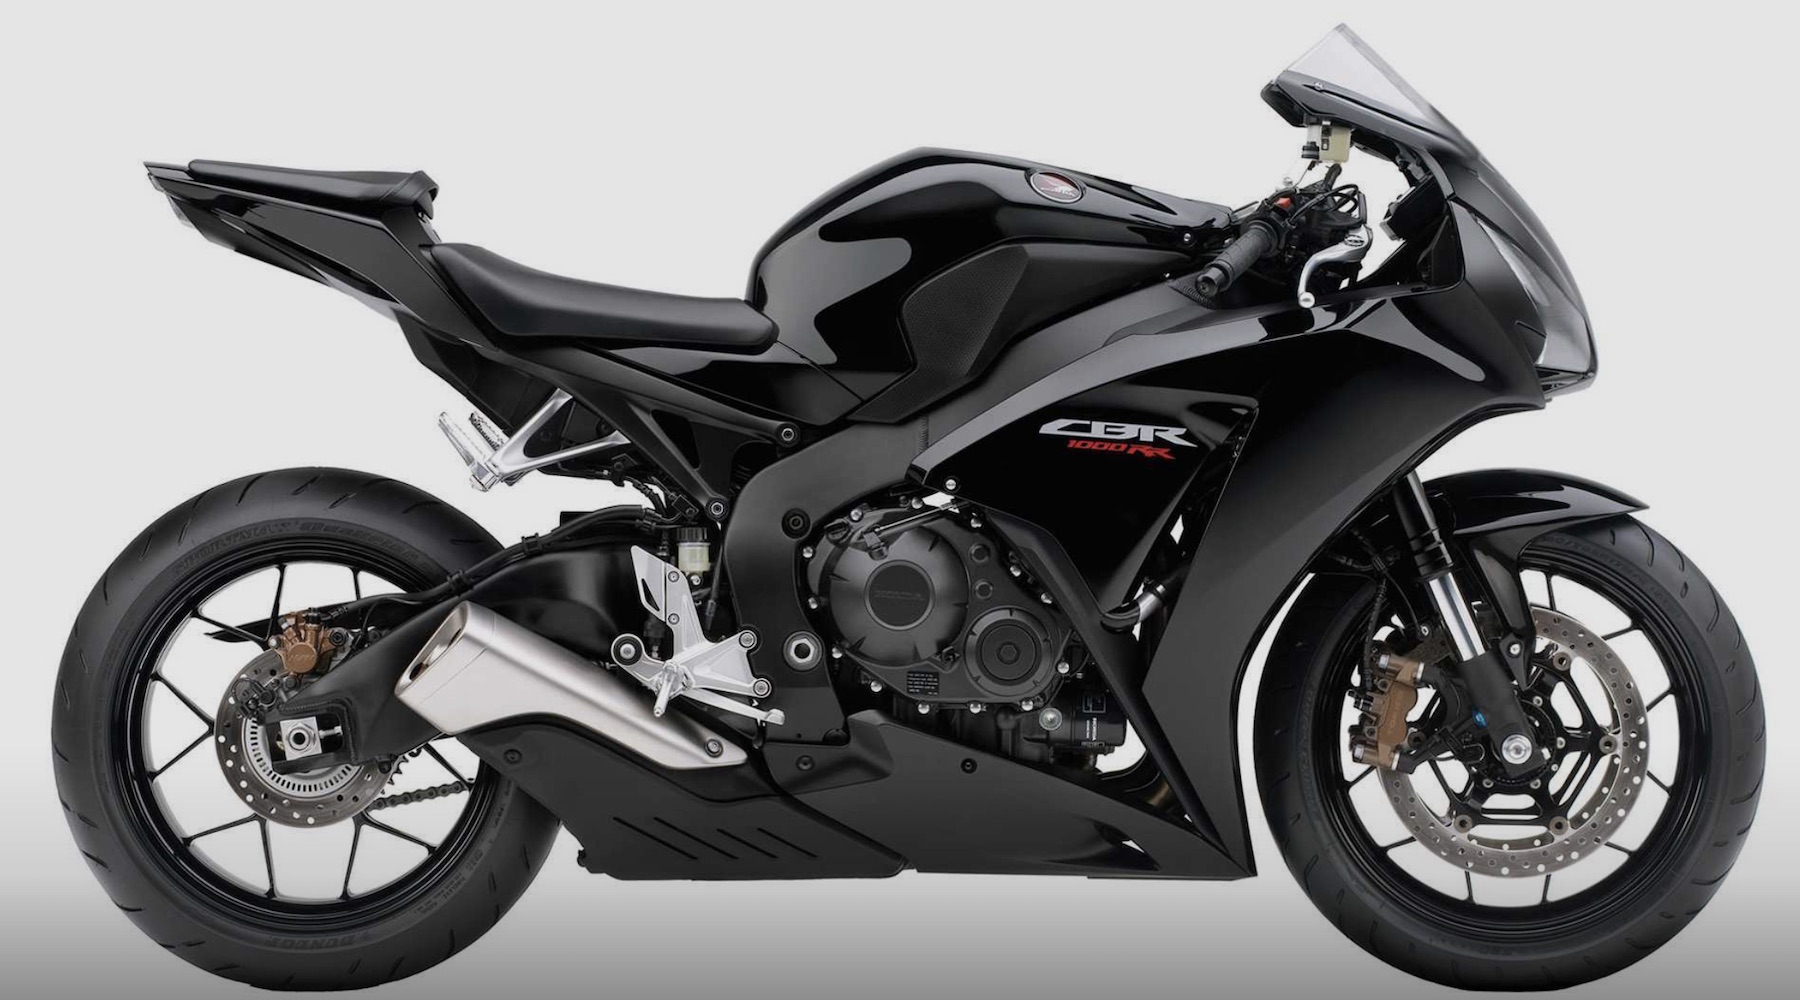 A Trademark Filing Suggests a Honda CBR1000RR-R Could be Coming